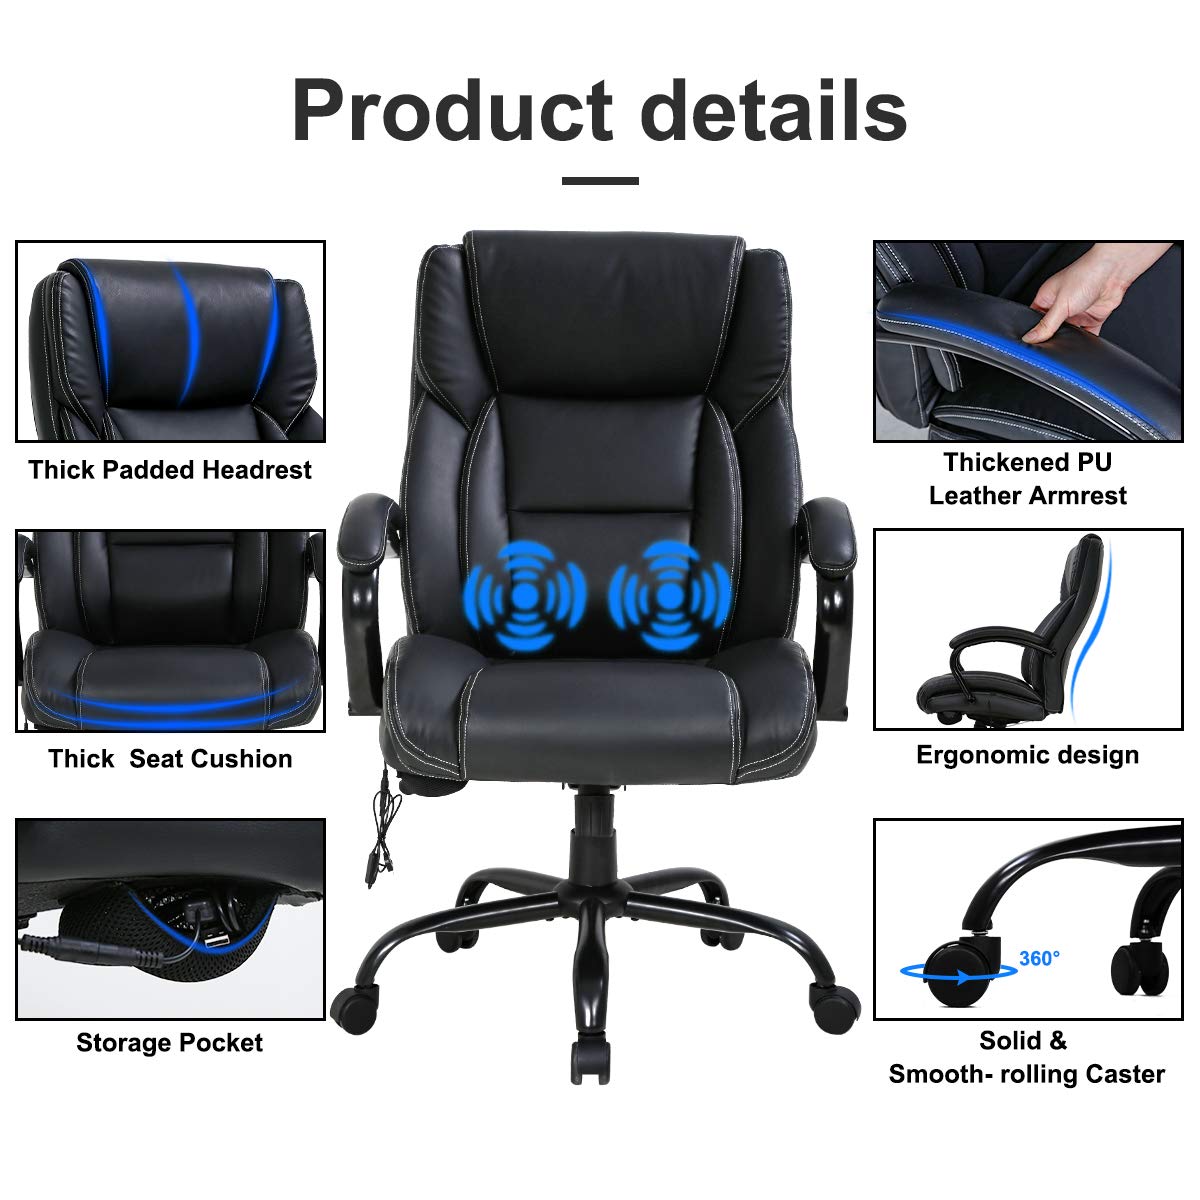 Big and Tall Executive Office Chair - Heavy Duty 500lbs Wide Seat PU Leather Swivel Rolling, Ergonomic Desk Computer Chair w/High Back & Lumbar Support Arms for Home Office Black